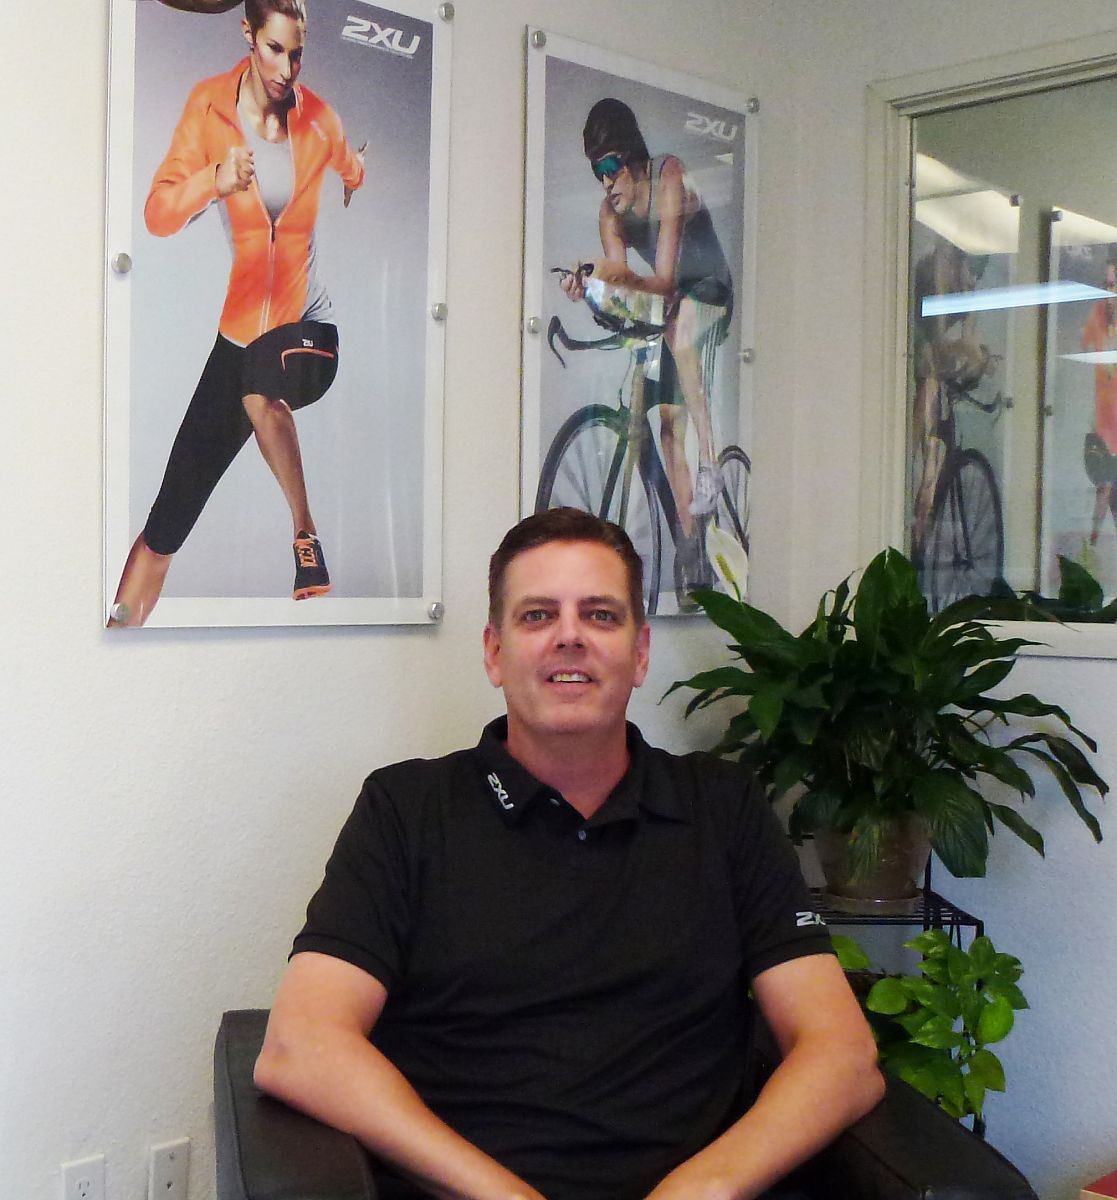 2XU opens second retail store, hires USA president Bicycle Retailer and Industry